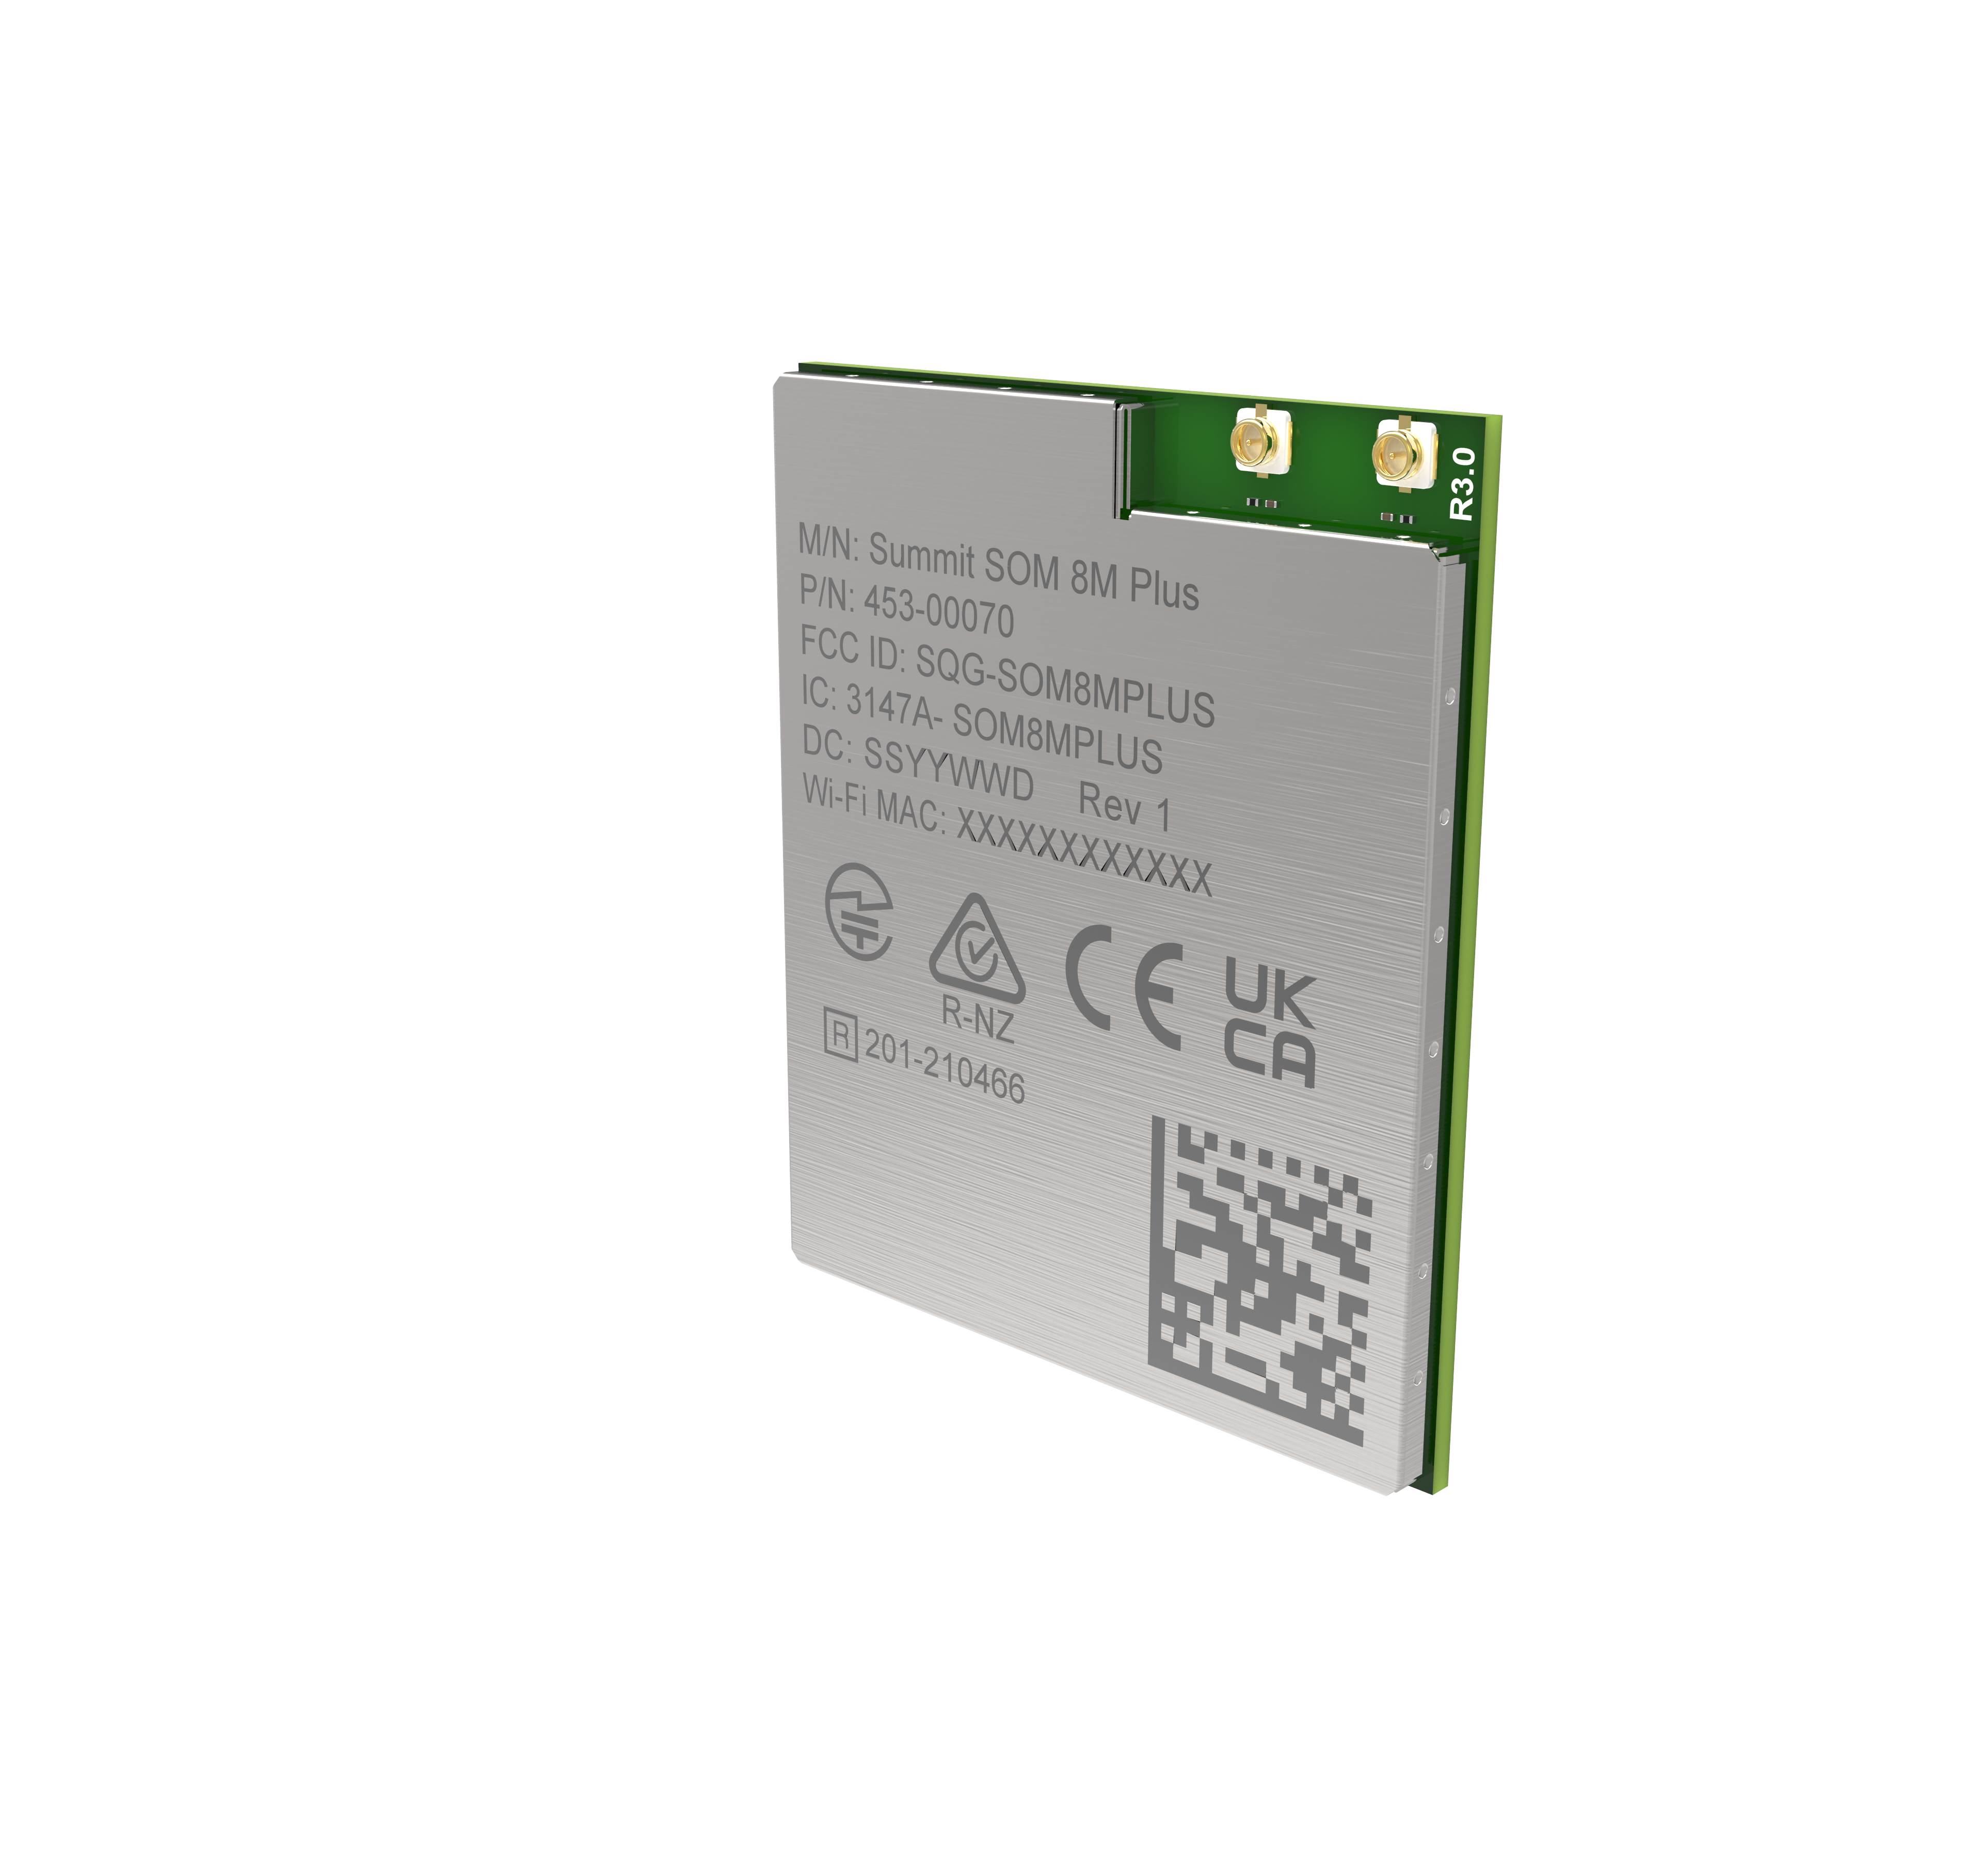 Laird Connectivity Launches New SOM that Delivers Powerful NXP Edge Processing with Wi-Fi and Bluetooth 